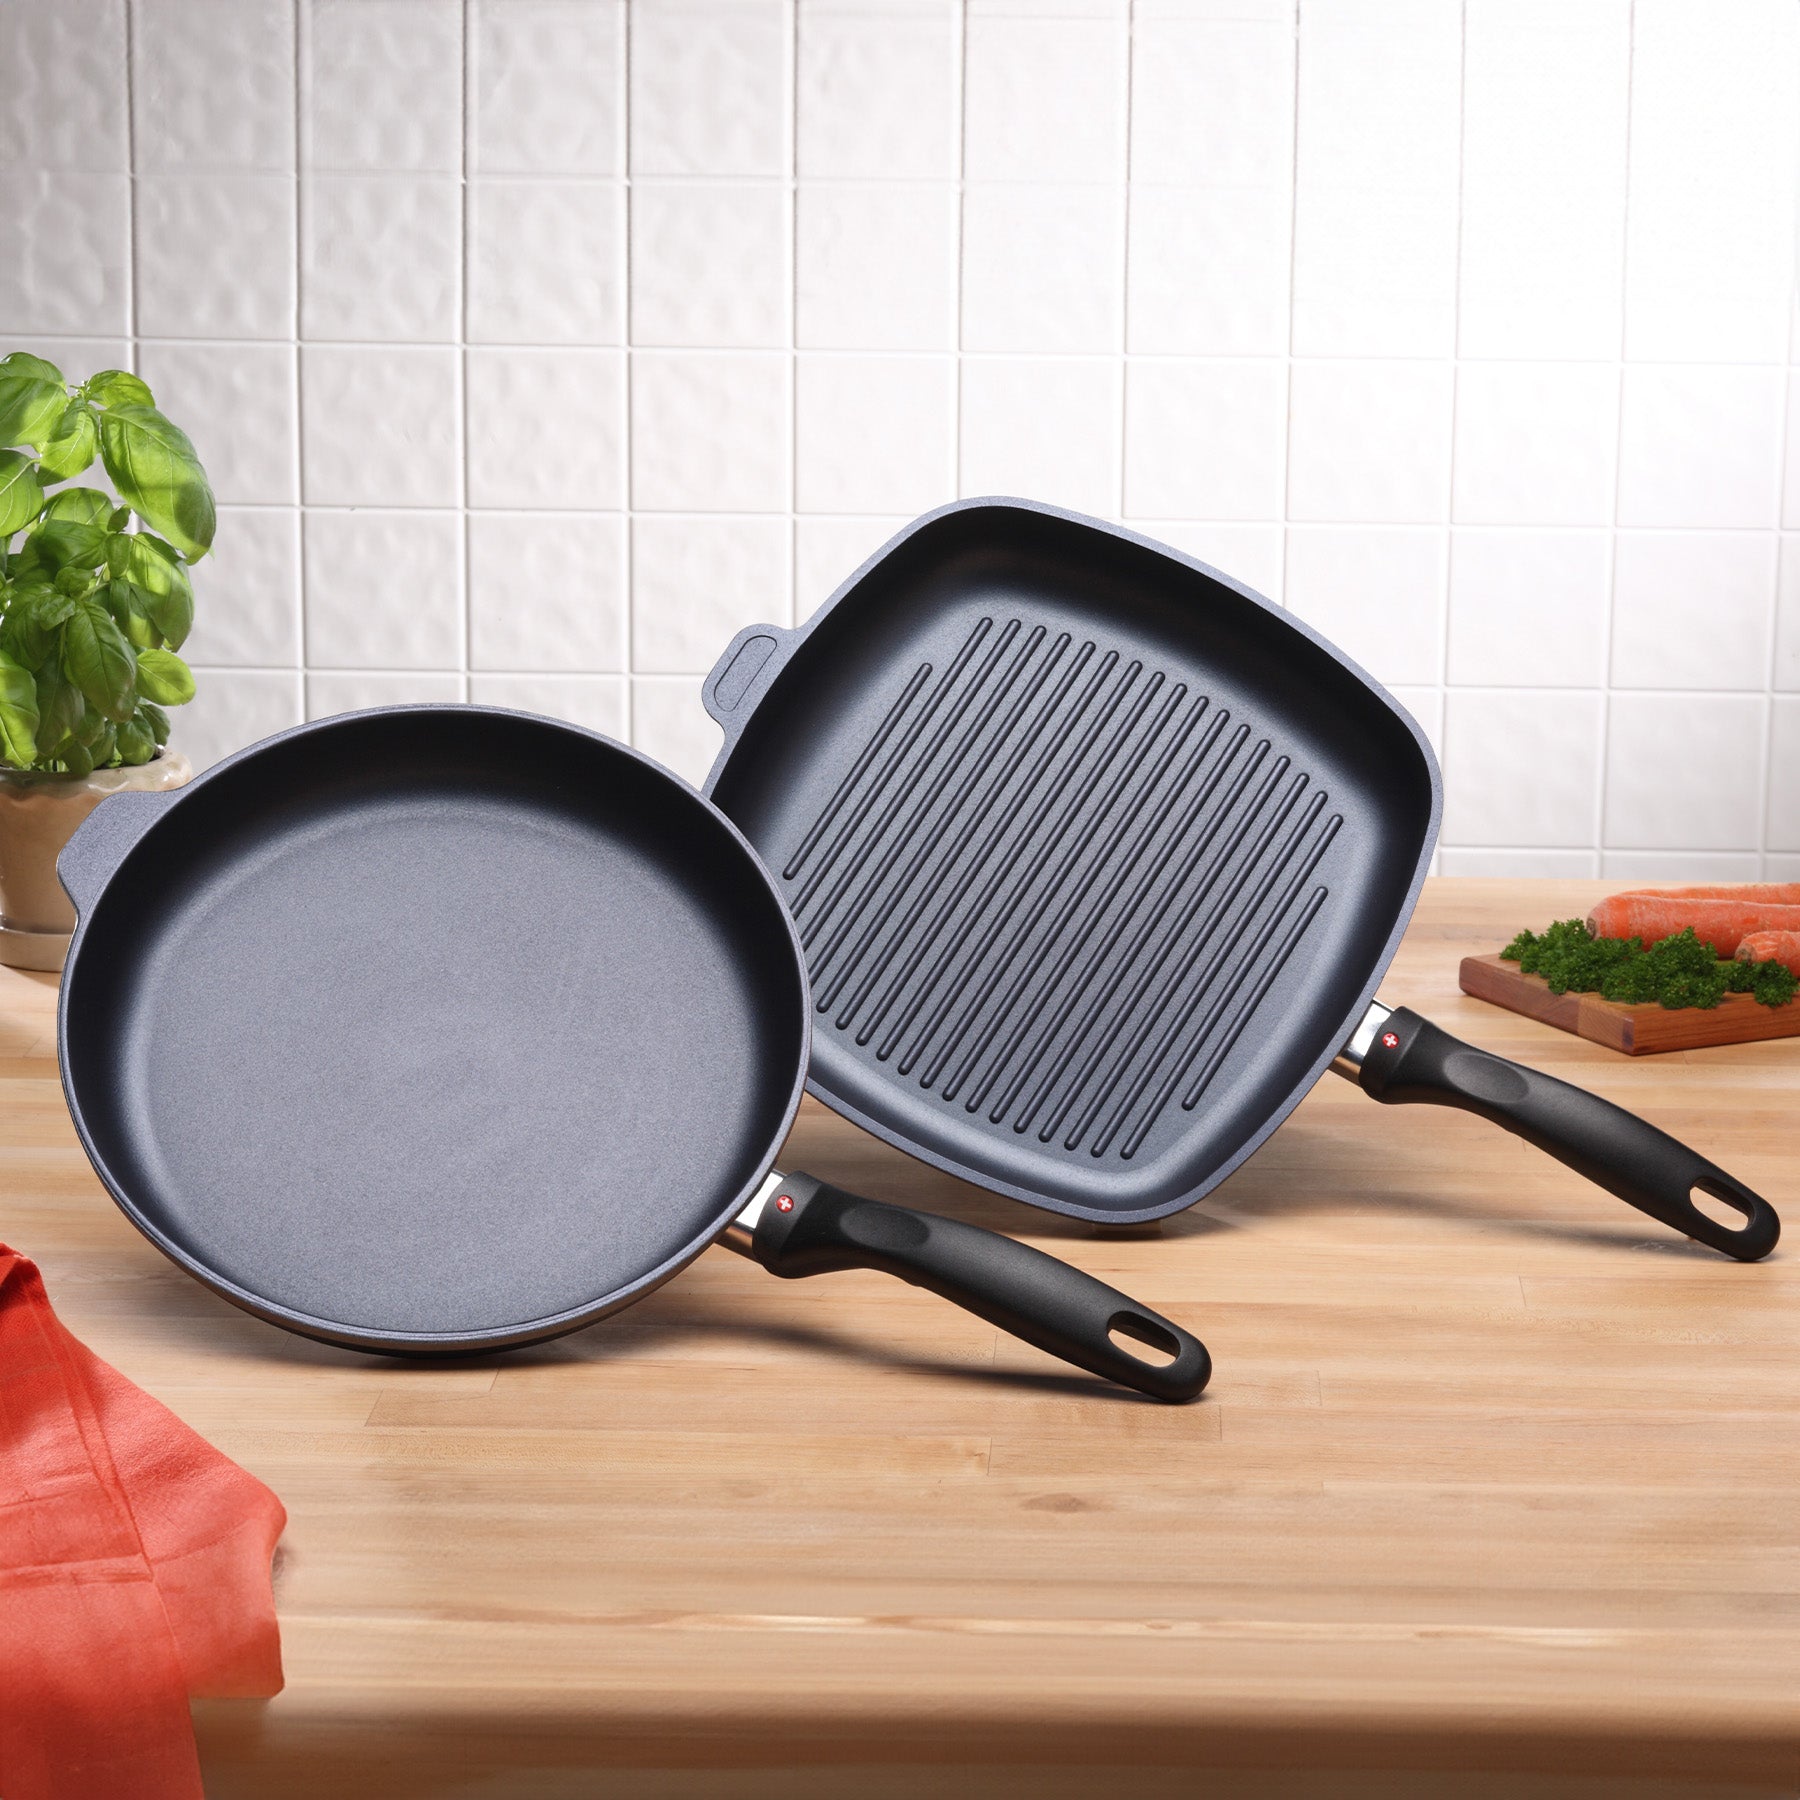 HD Nonstick 2-Piece Set - Fry Pan & Square Grill Pan in use on kitchen counter